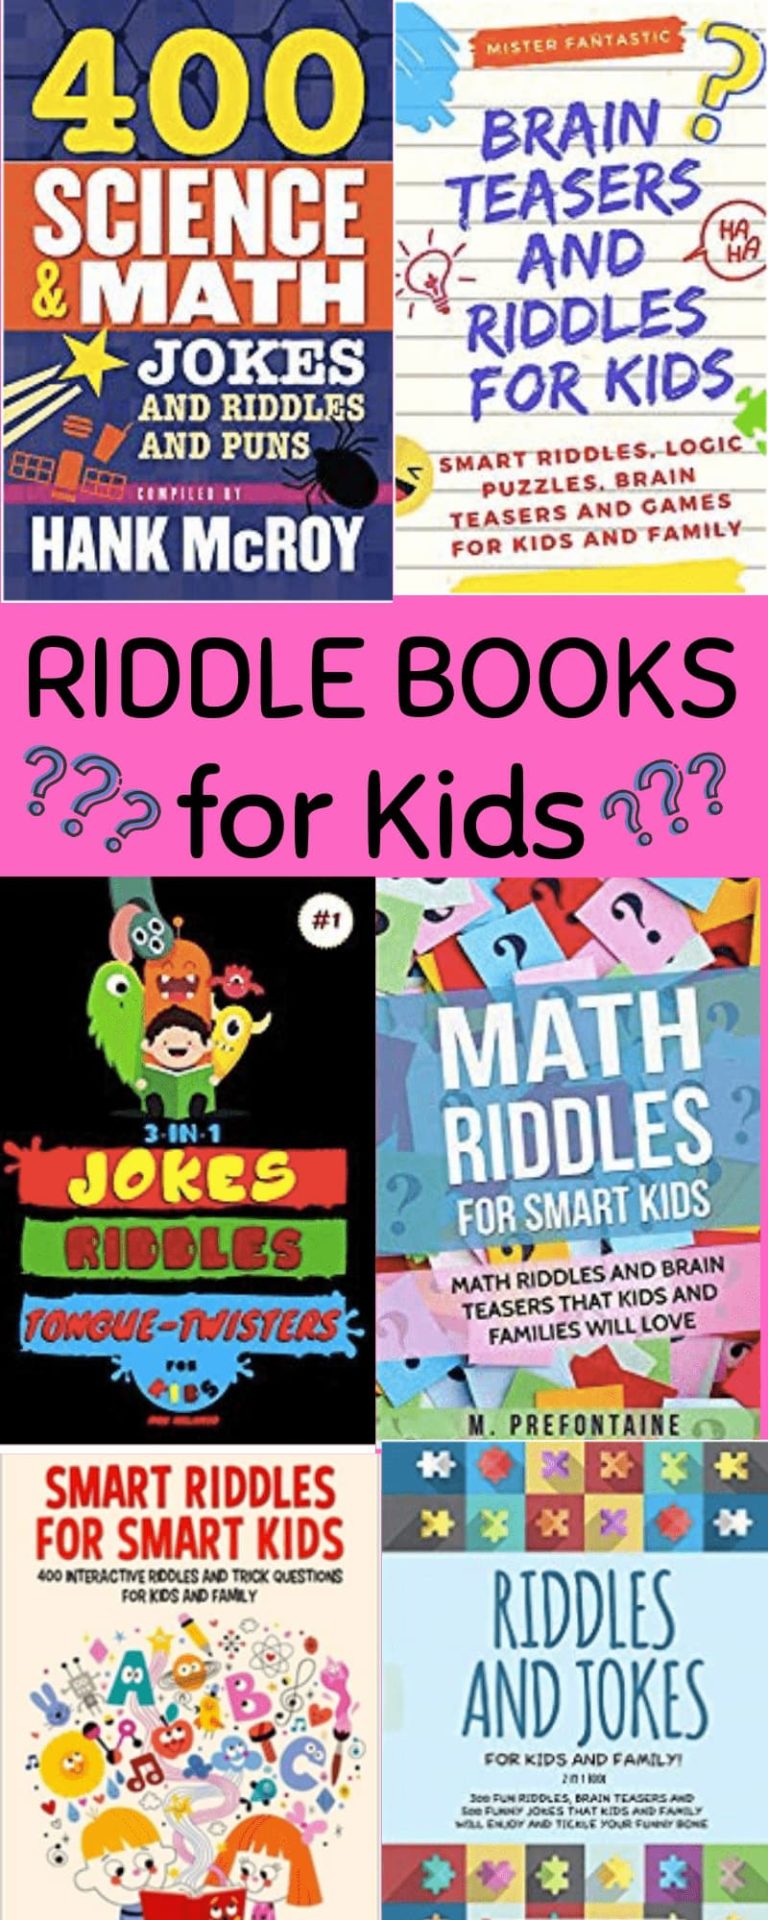 riddle books infographic